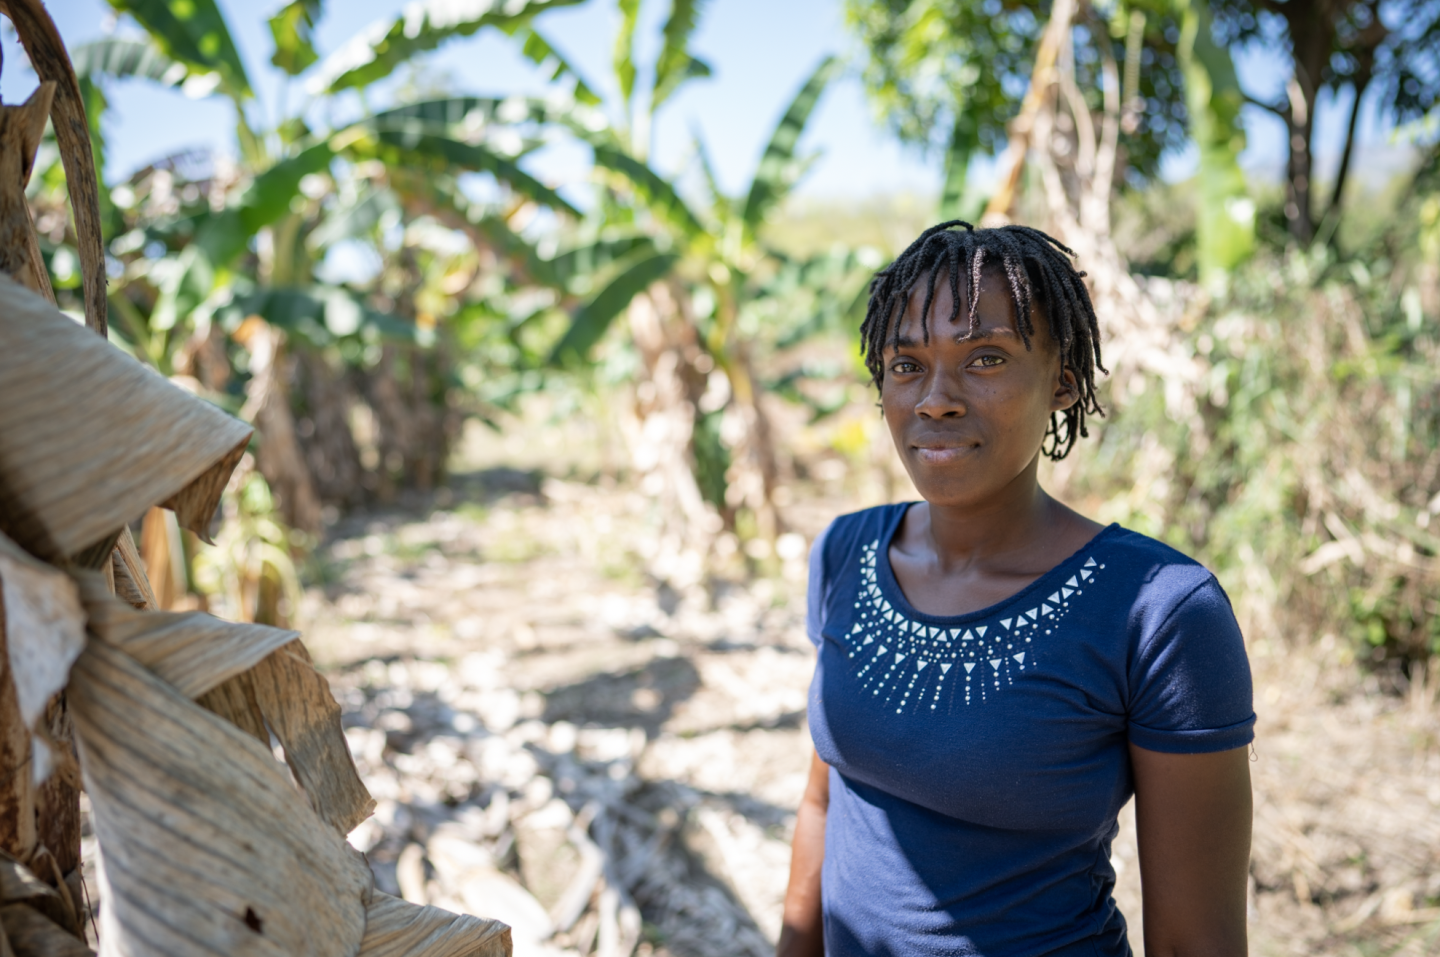 A Haitian woman in a blue shirt stands in a field